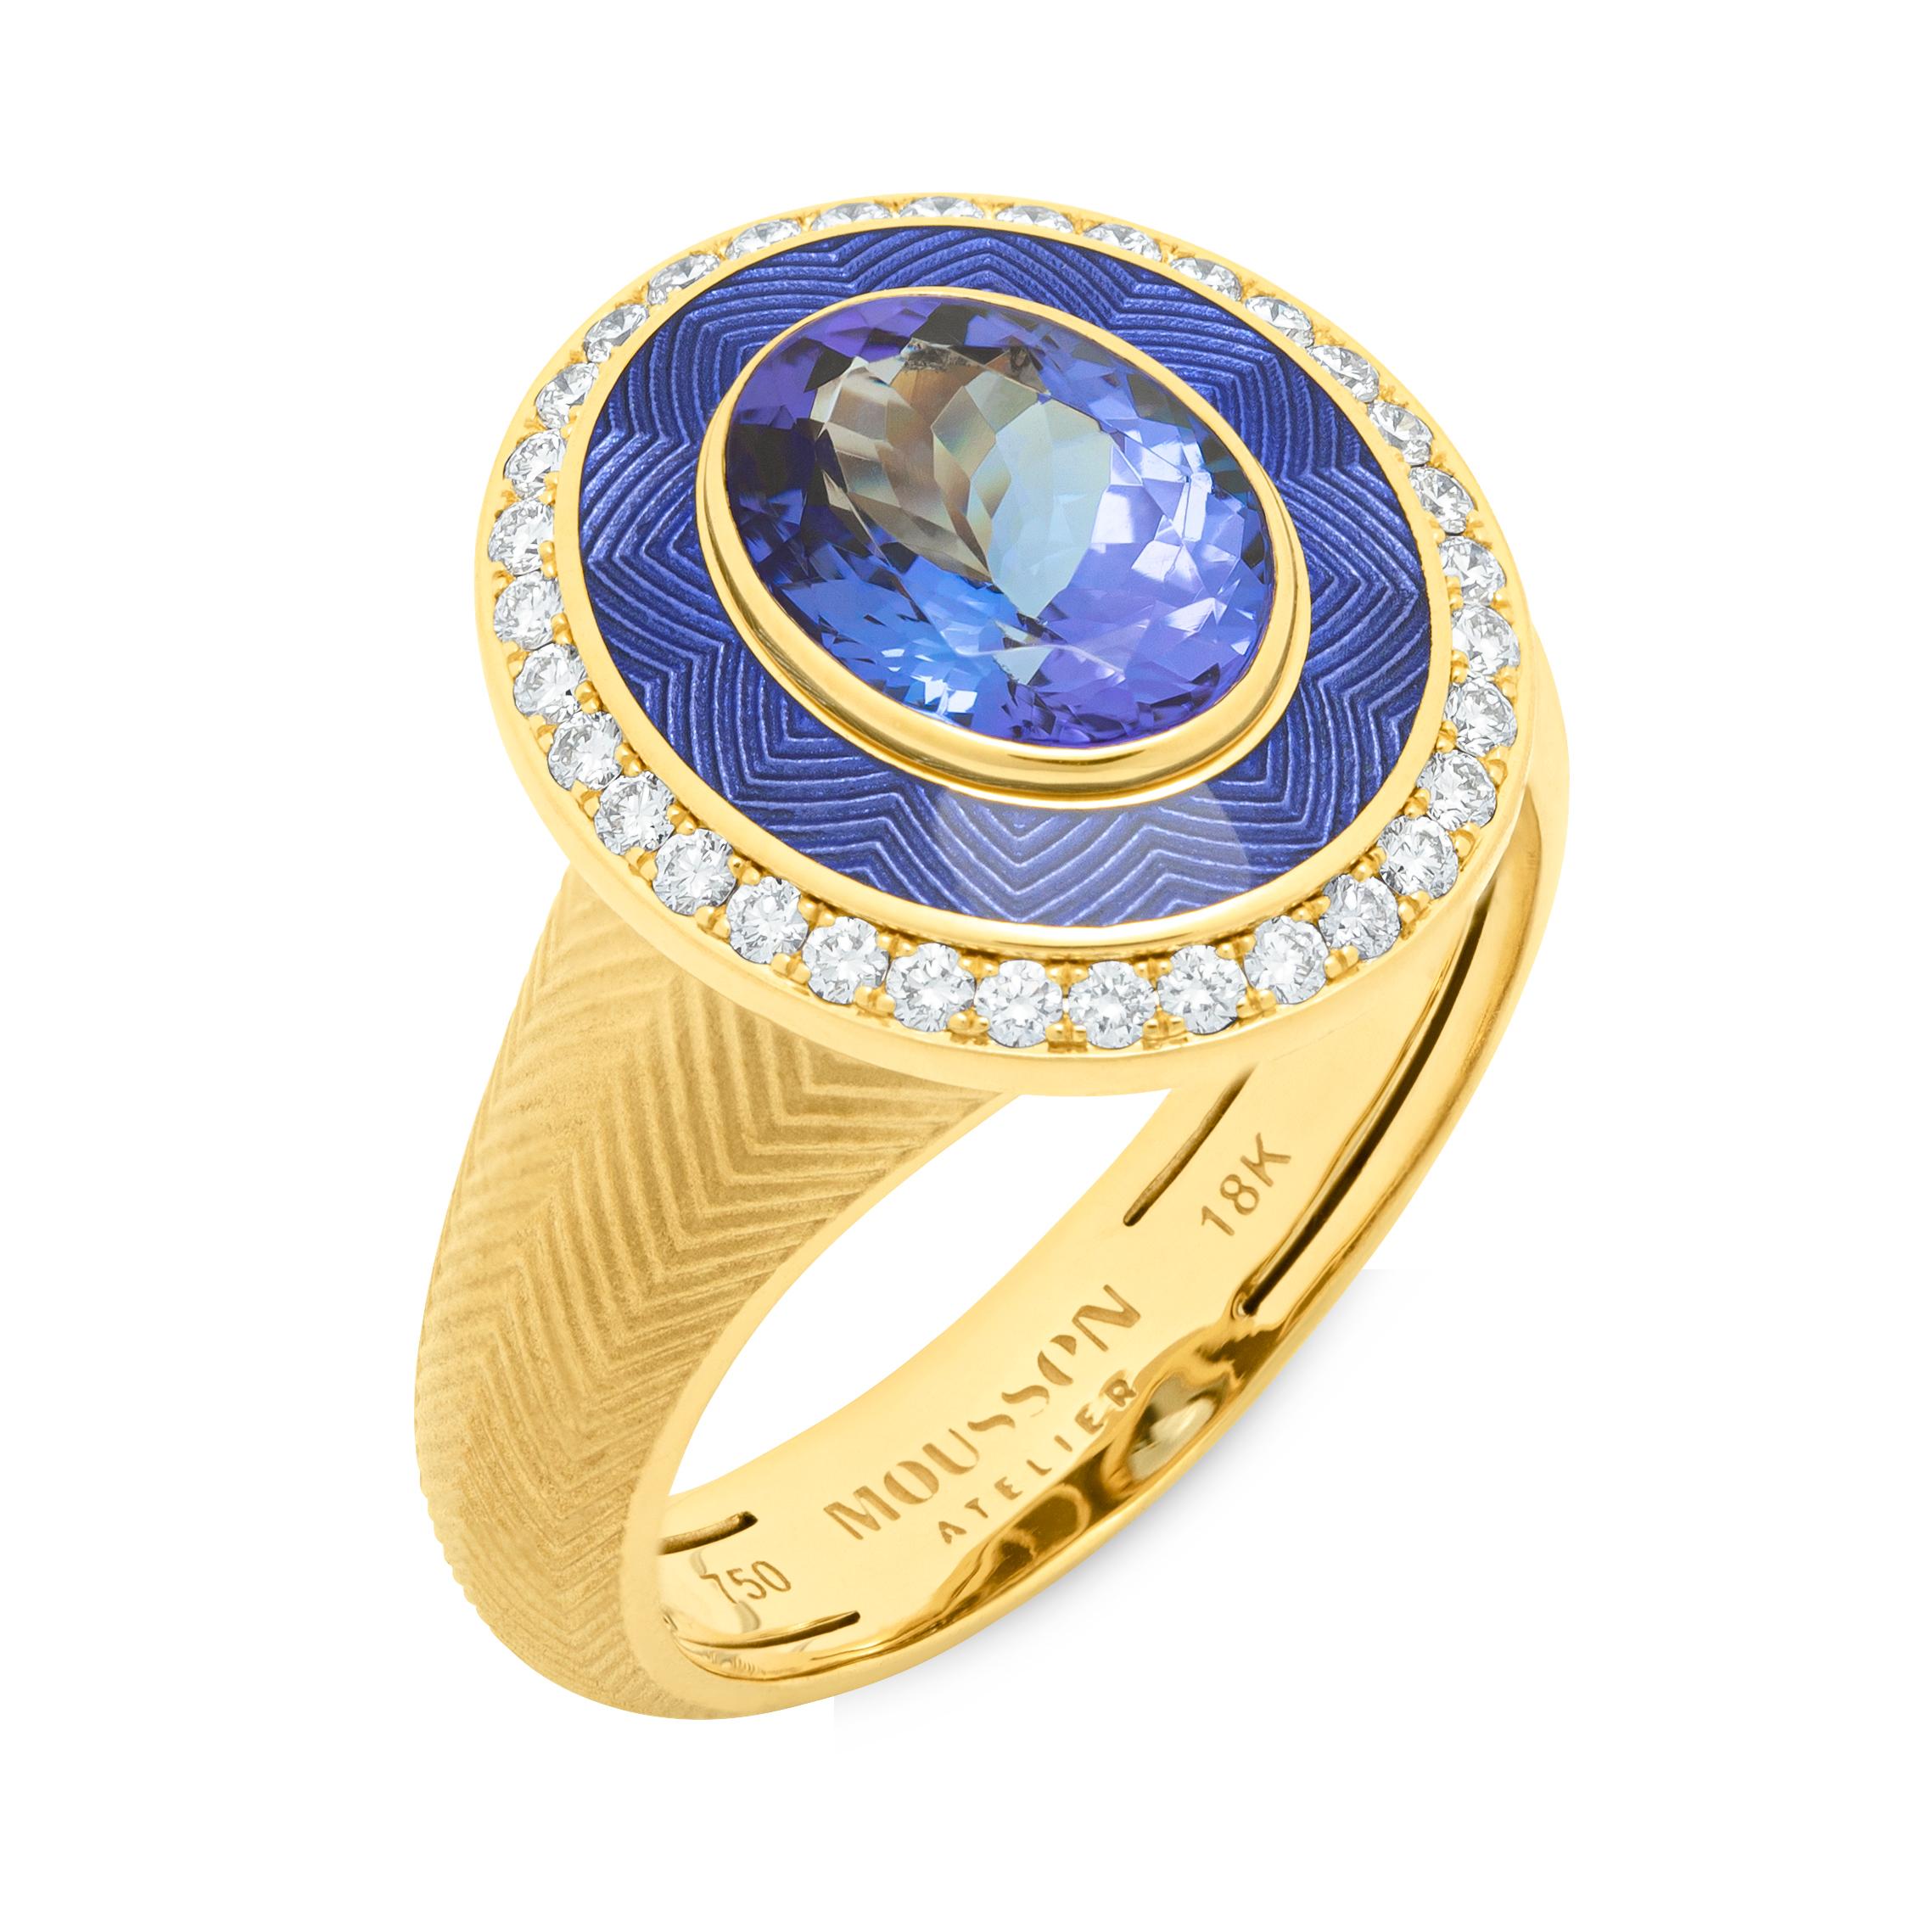 18K Yellow Gold, Enamel, Tanzanite, Diamonds Ring

The Tweed-inspired texture pays homage to guilloche, an intricate and sophisticated technique widely known from the legendary Faberge. Mousson Atelier was the first to bring this rare texture to